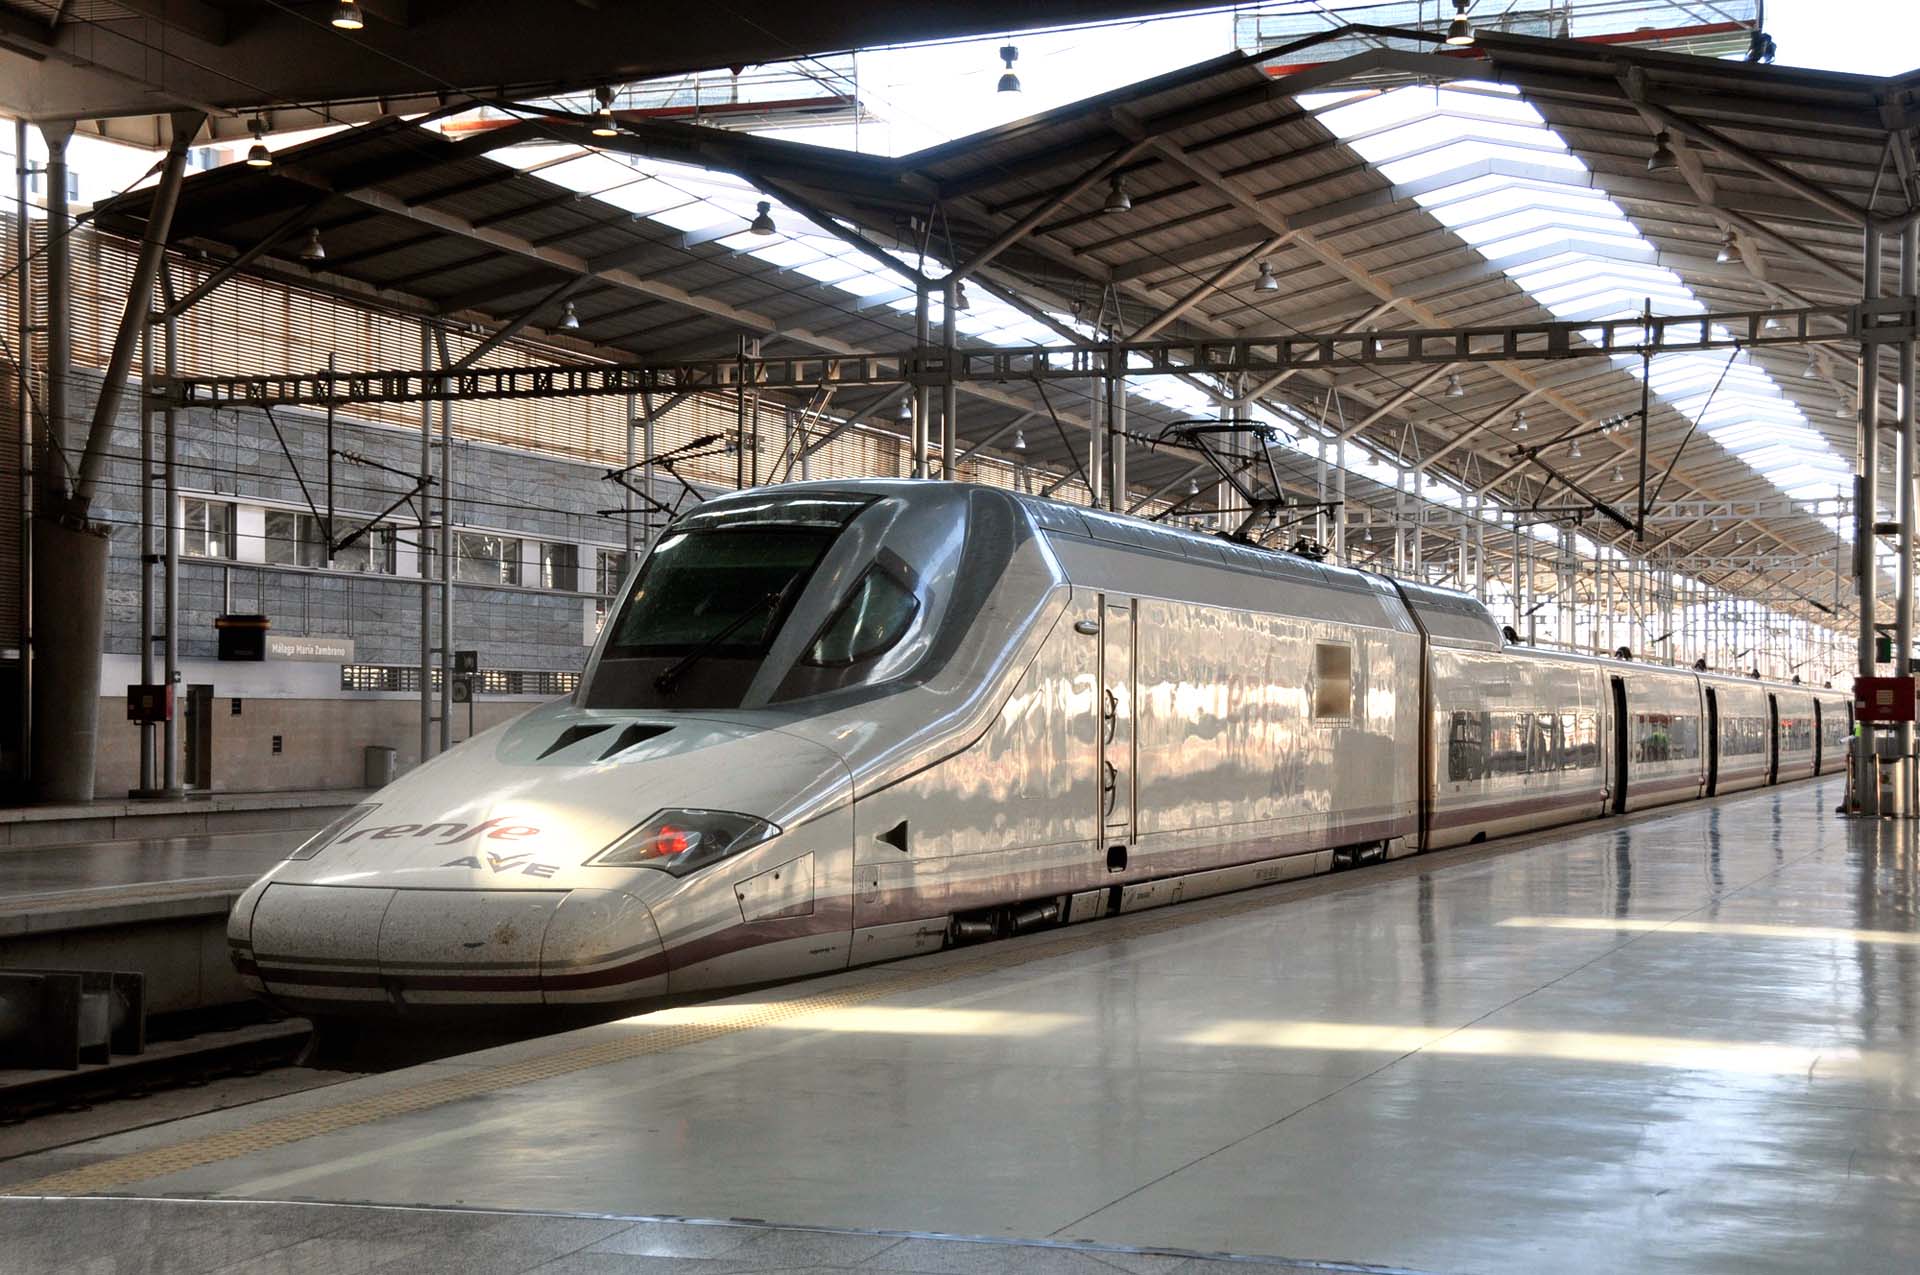 This is how we got from Malaga to the airport in Madrid. Operated by RENFE, the Spanish High Speed Rail system is smooth, comfortable and very fast. Amazing that we have nothing like this in Canada!